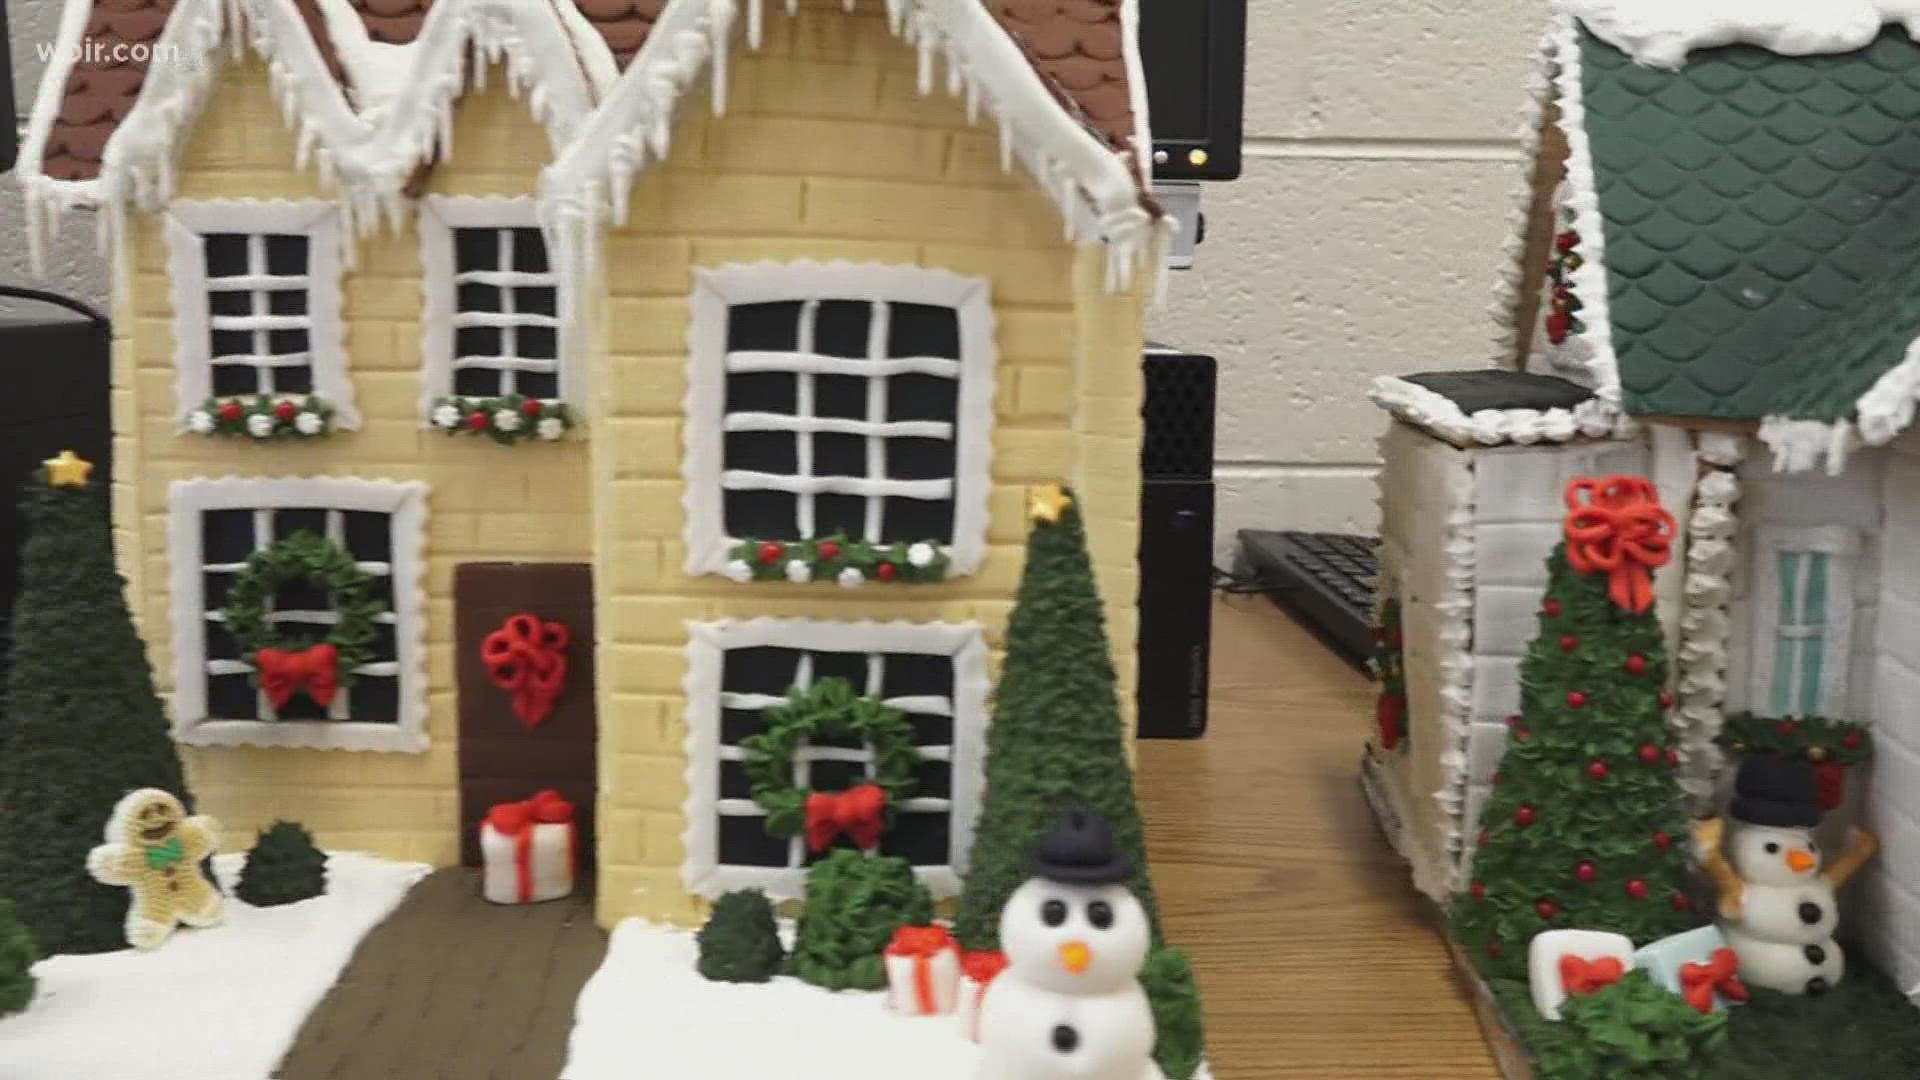 Farragut High School students create amazing gingerbread houses that are completely edible. Nov. 24, 2021-4pm.